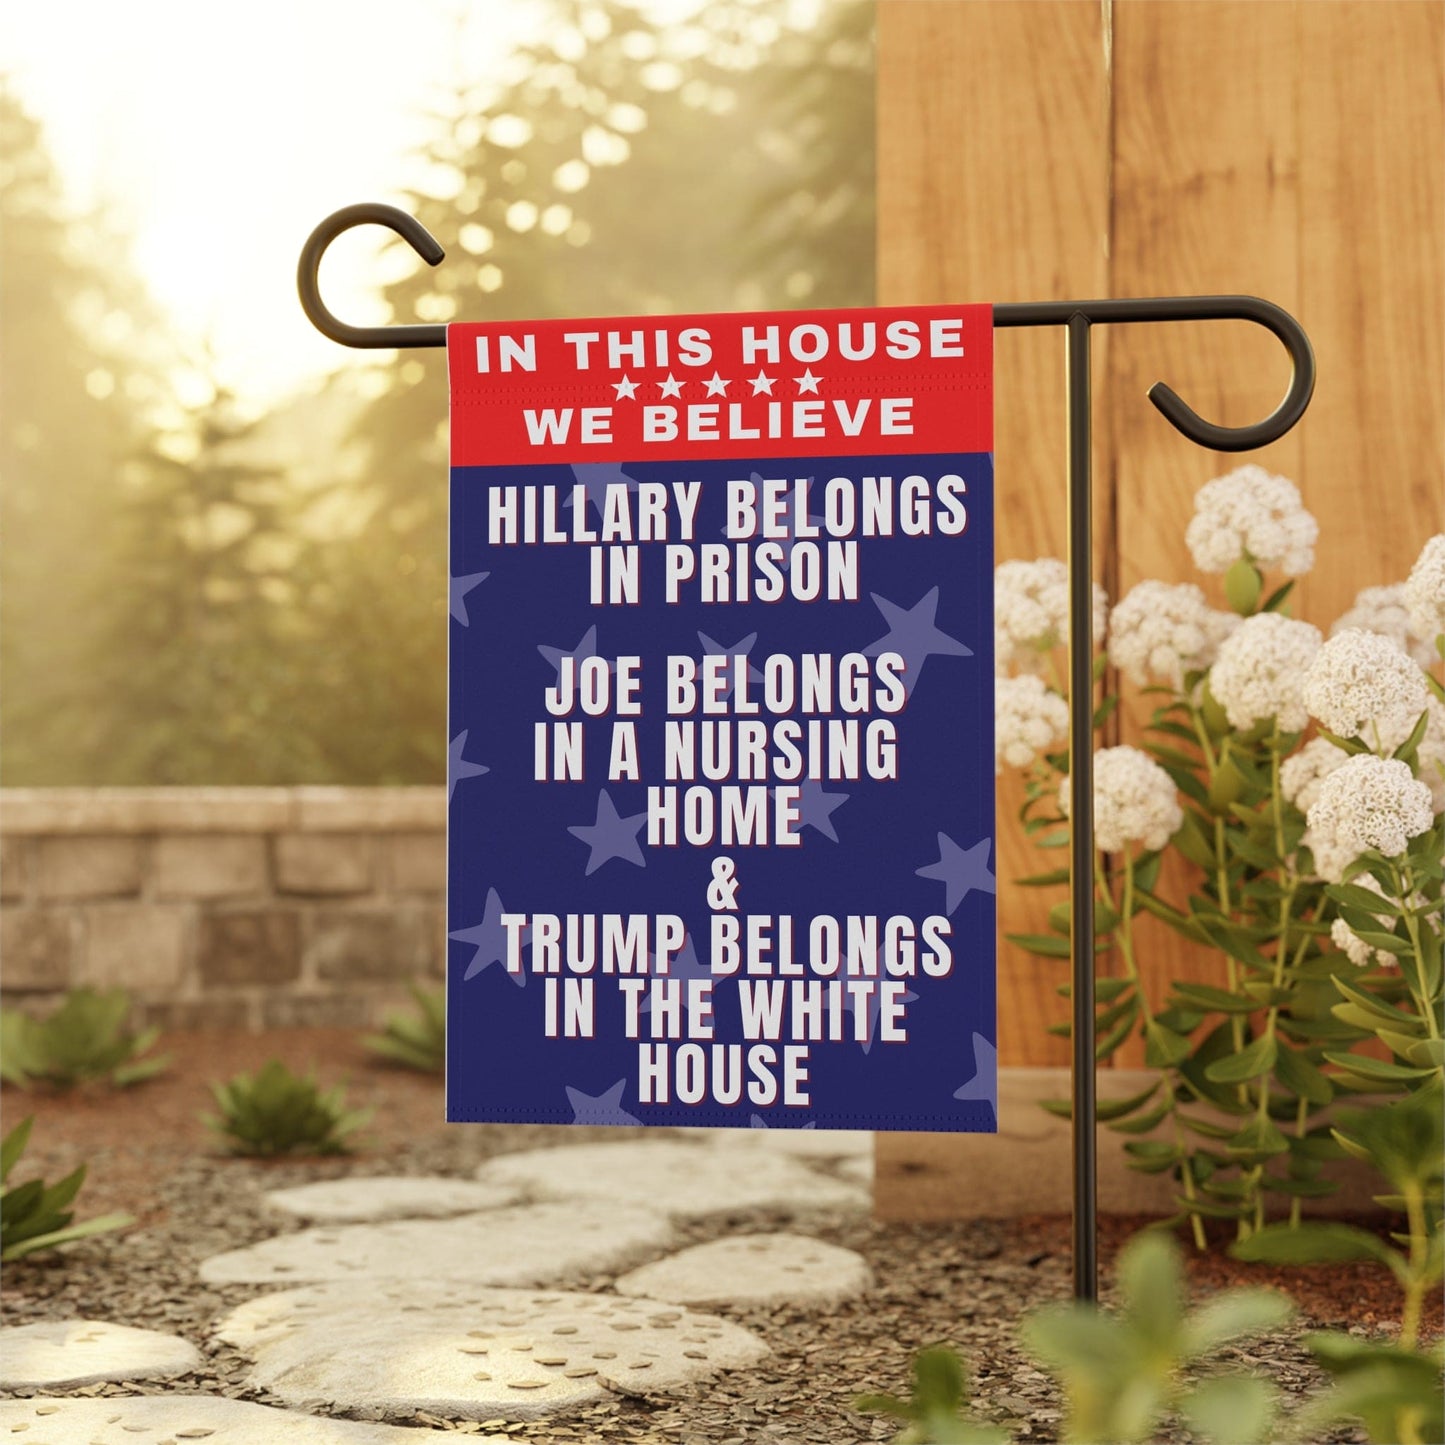 In this House We Believe Hillary belongs in Prison and Trump belongs in the White House